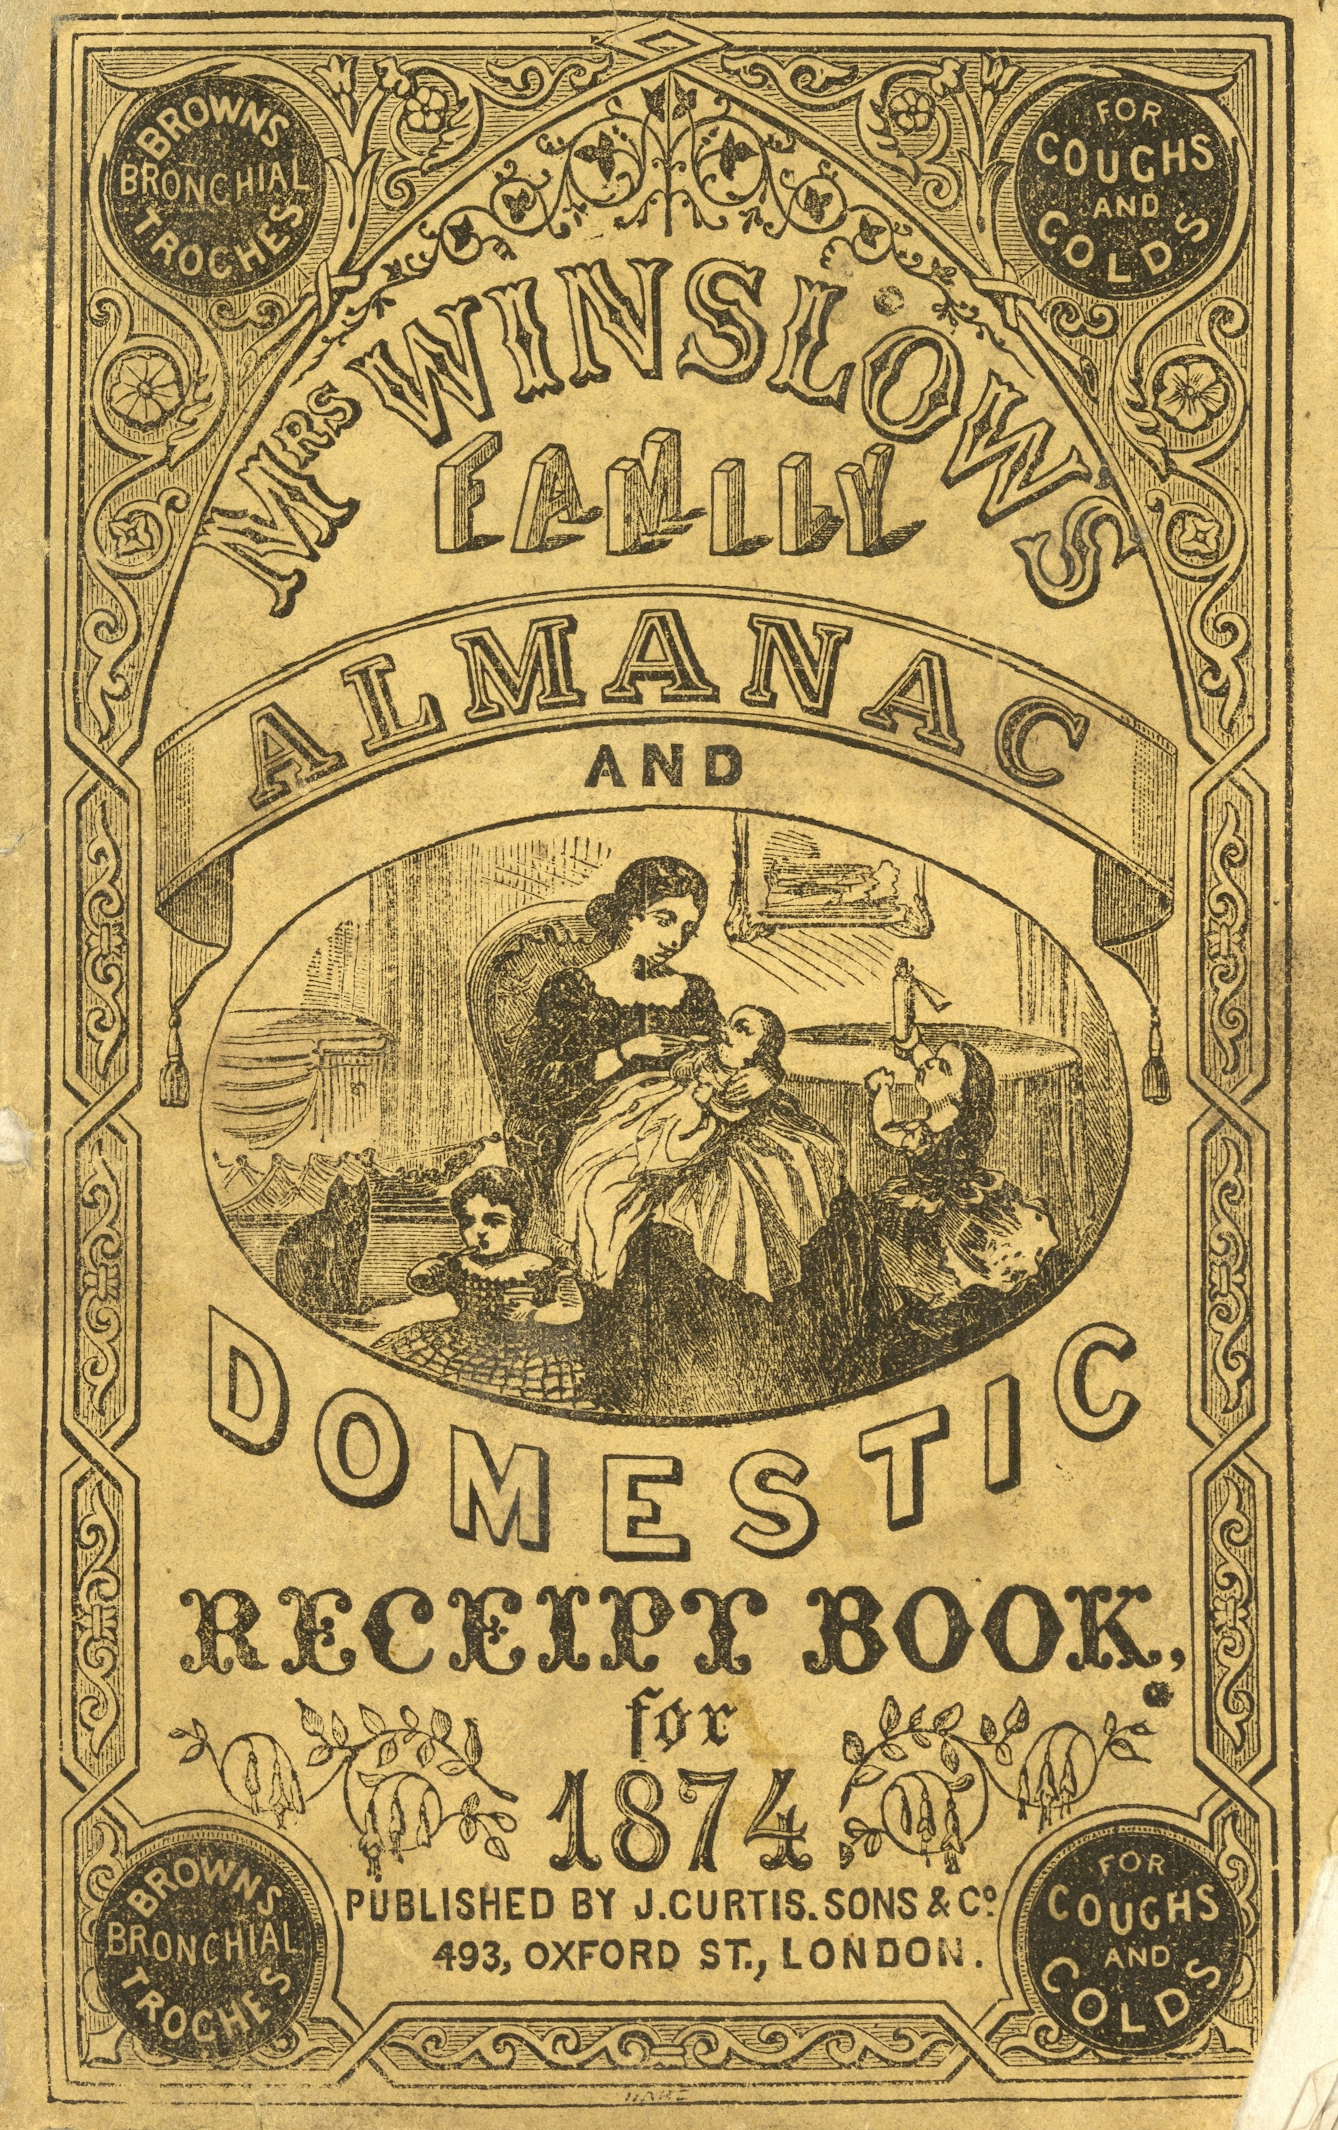 Mrs Winslow's Almanac and Domestic Receipt Book for 1874